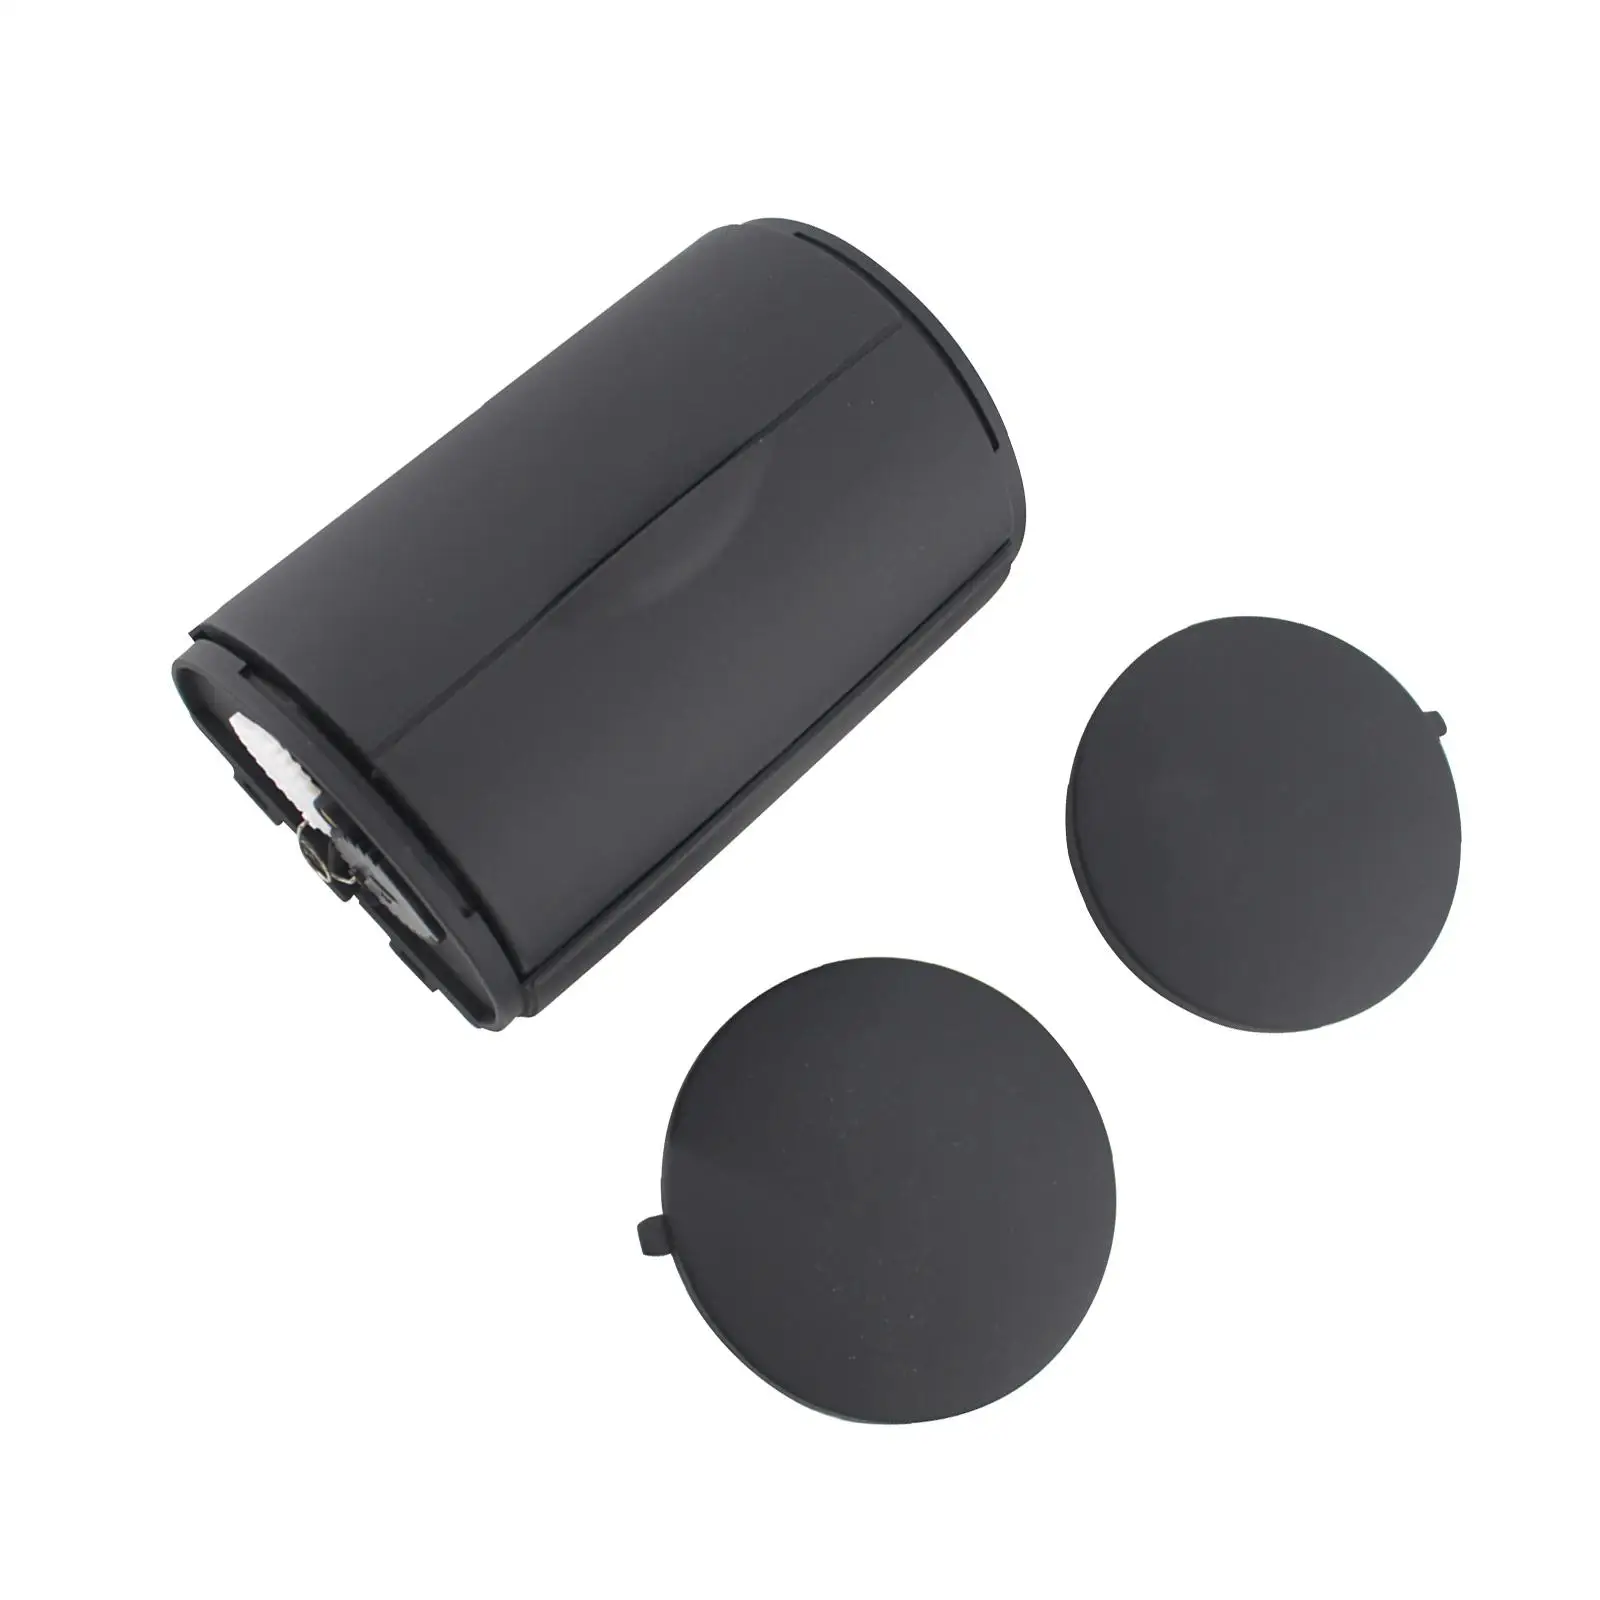 Car Ashtray, Car Accessories Portable Easy Cleaning Container Ash Holder Durable Ash Storage Tray for Cigarette Travel